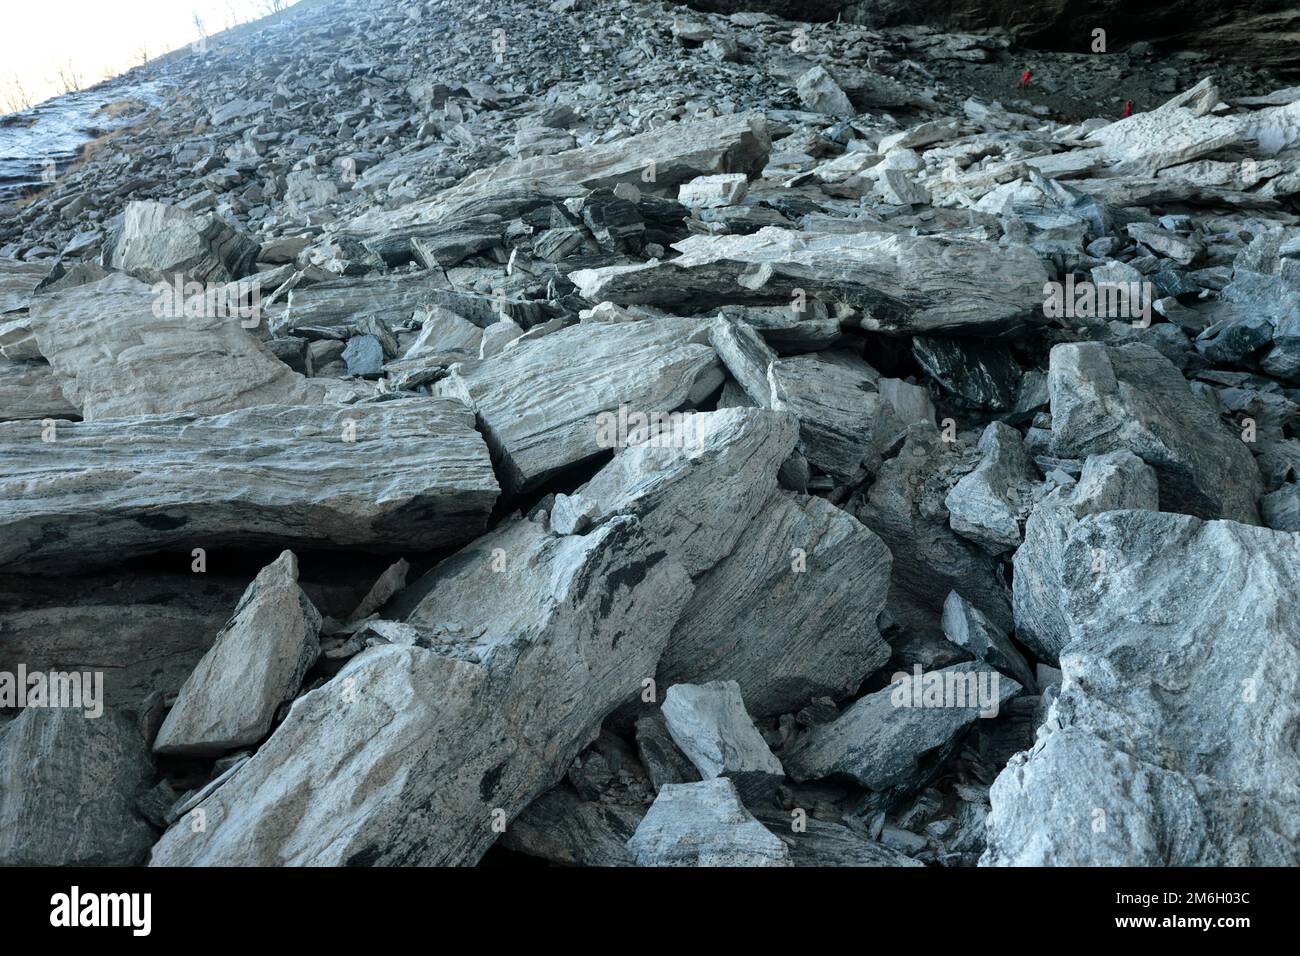 Stones and boulders at the foot of a mountain slope Stock Photo